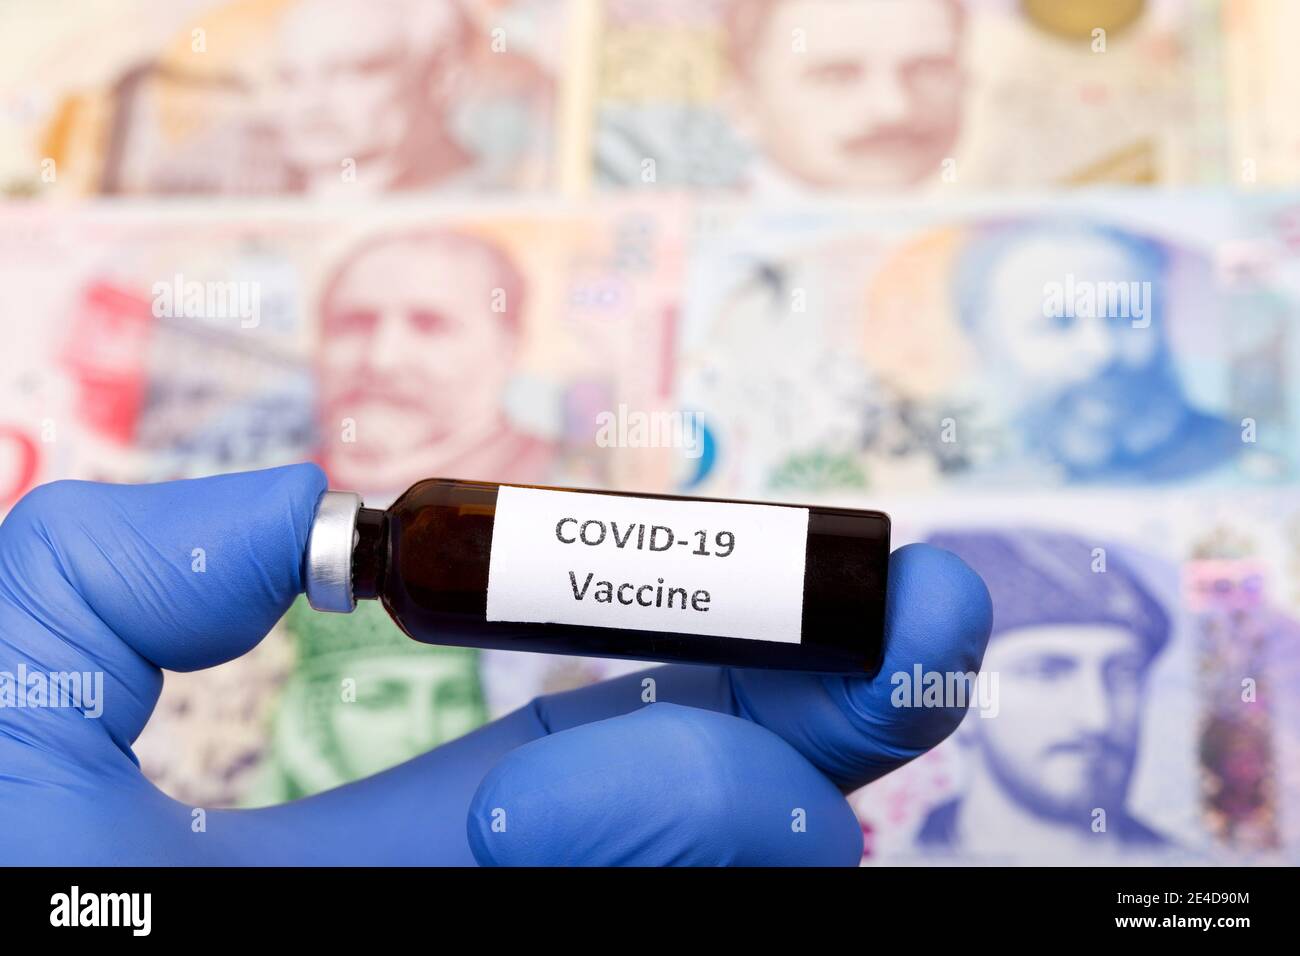 Vaccine against Covid-19 on the background of Georgian money Stock Photo